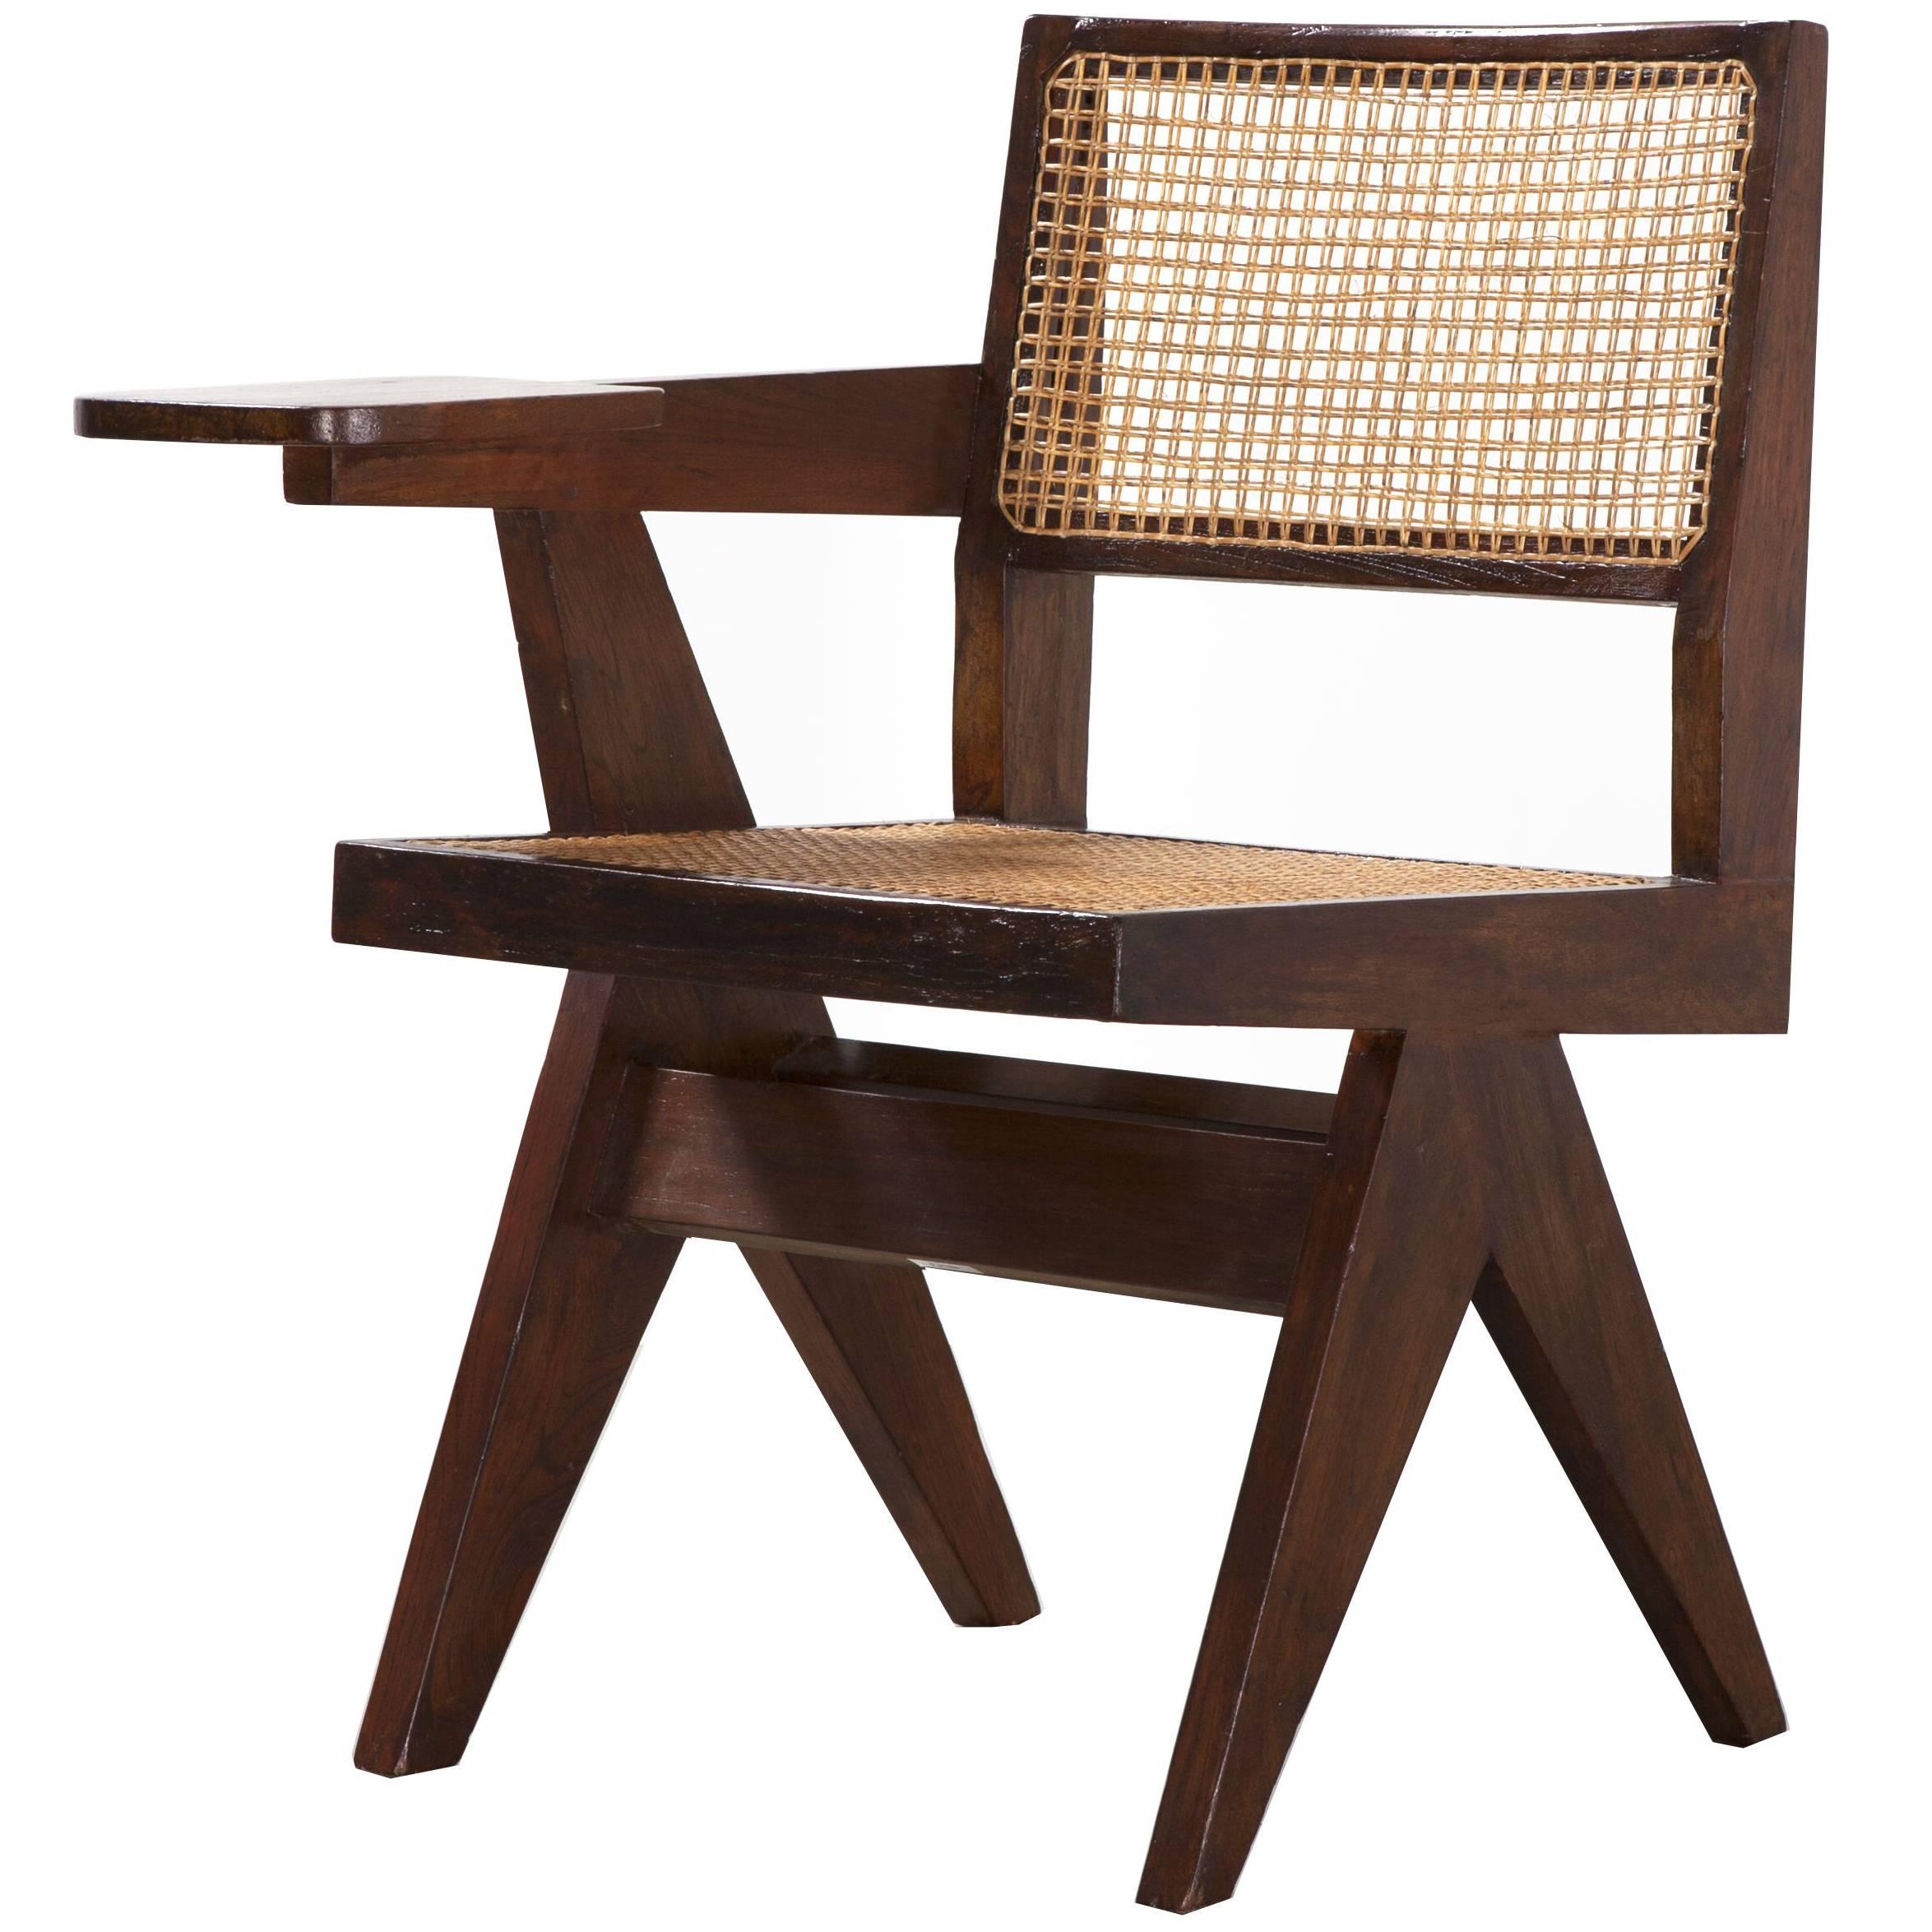 Pierre Jeanneret, Writing Chair, circa 1960